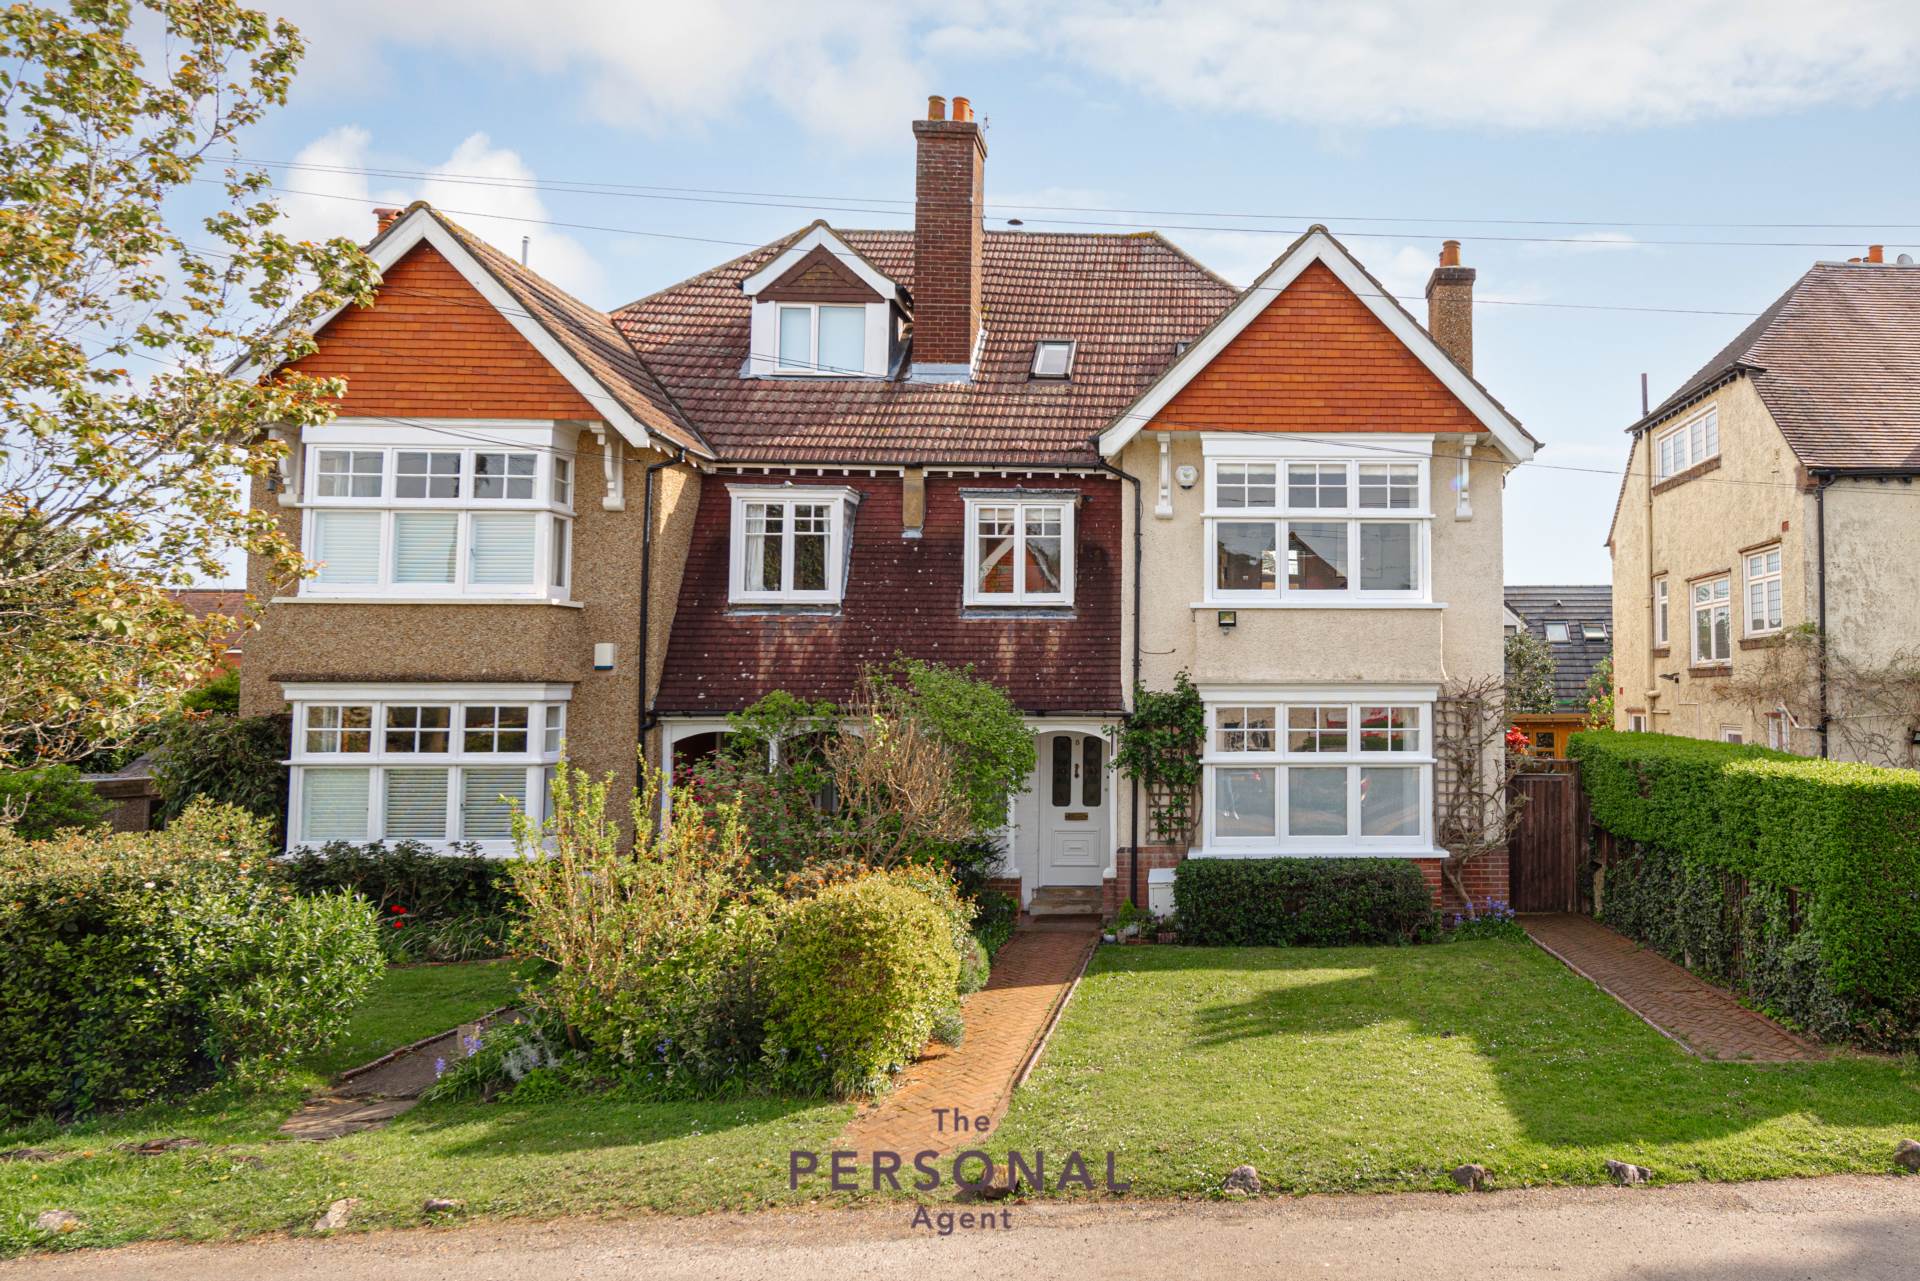 5 bed Semi-Detached House for rent in Epsom. From The Personal Agent - Epsom